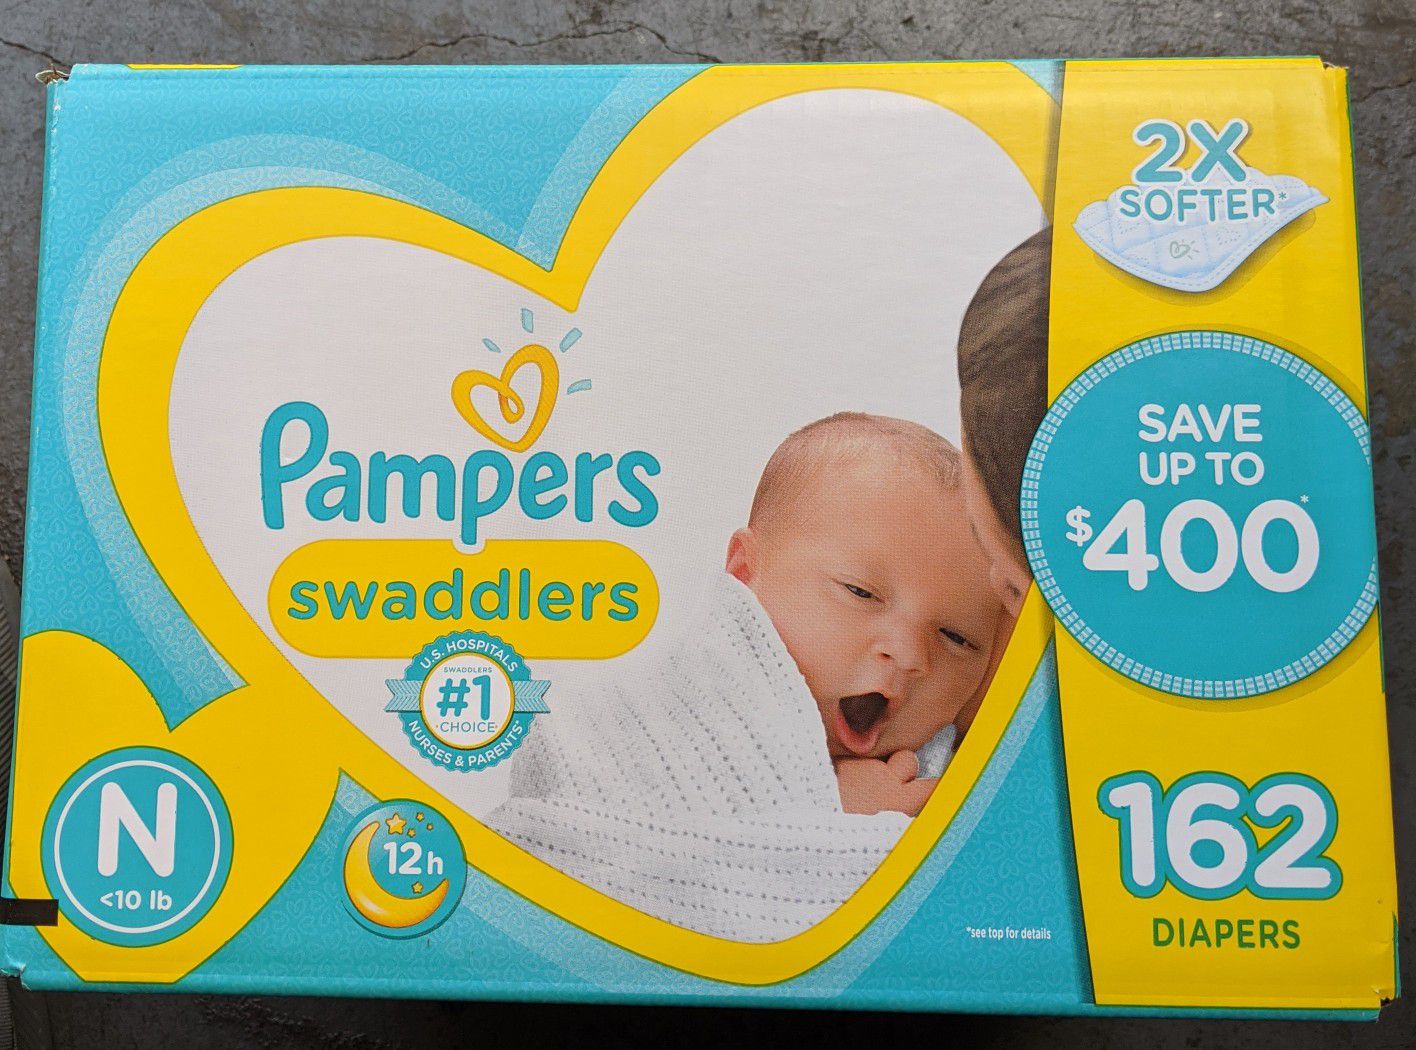 Pampers swaddlers size newborn 162 count